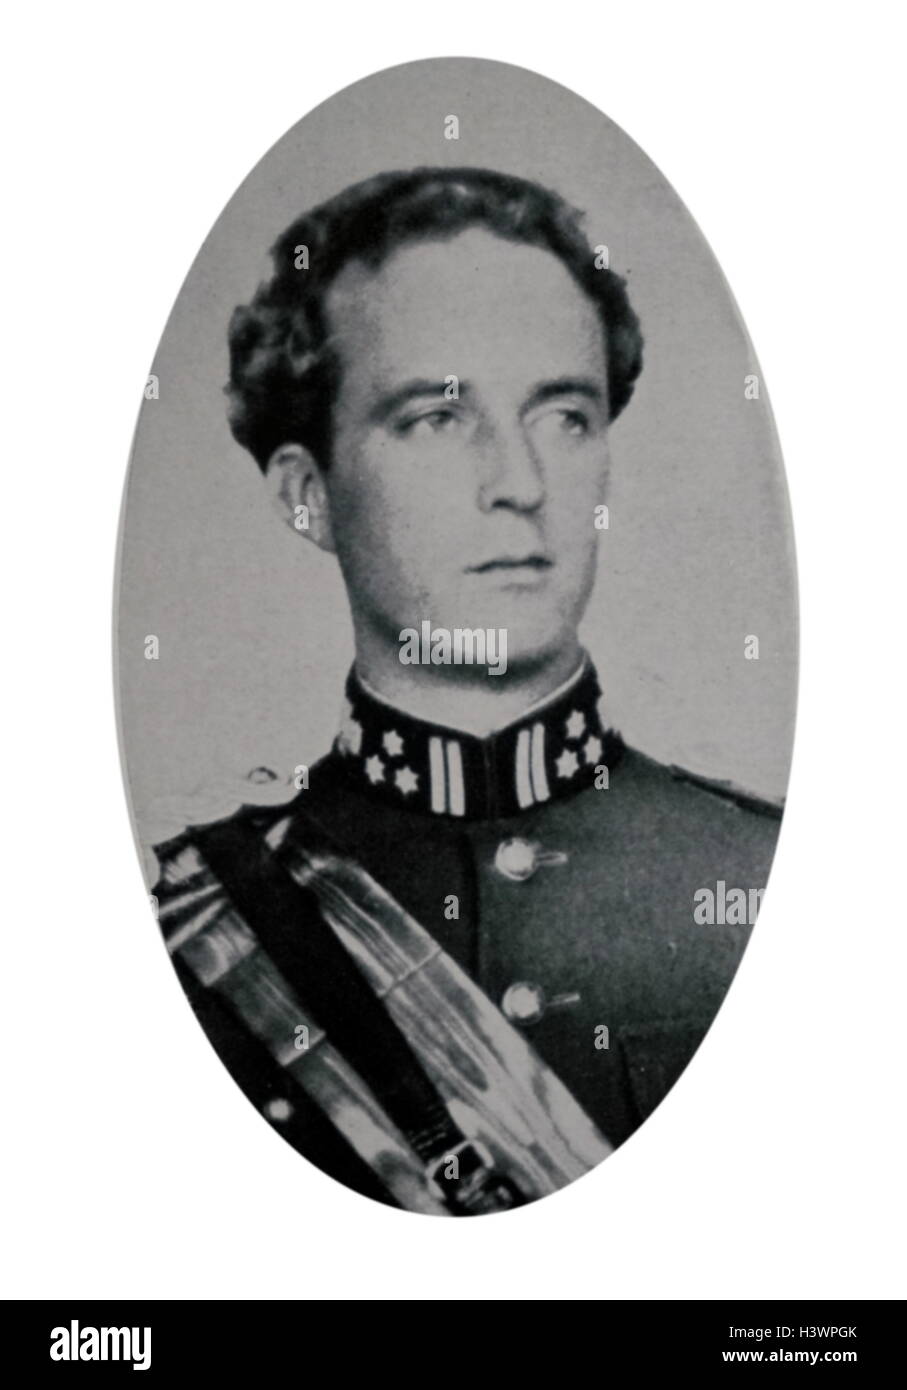 Photographic portrait of Leopold III of Belgium (1901-1983) King of the Belgians until his abdication. Dated 20th Century Stock Photo